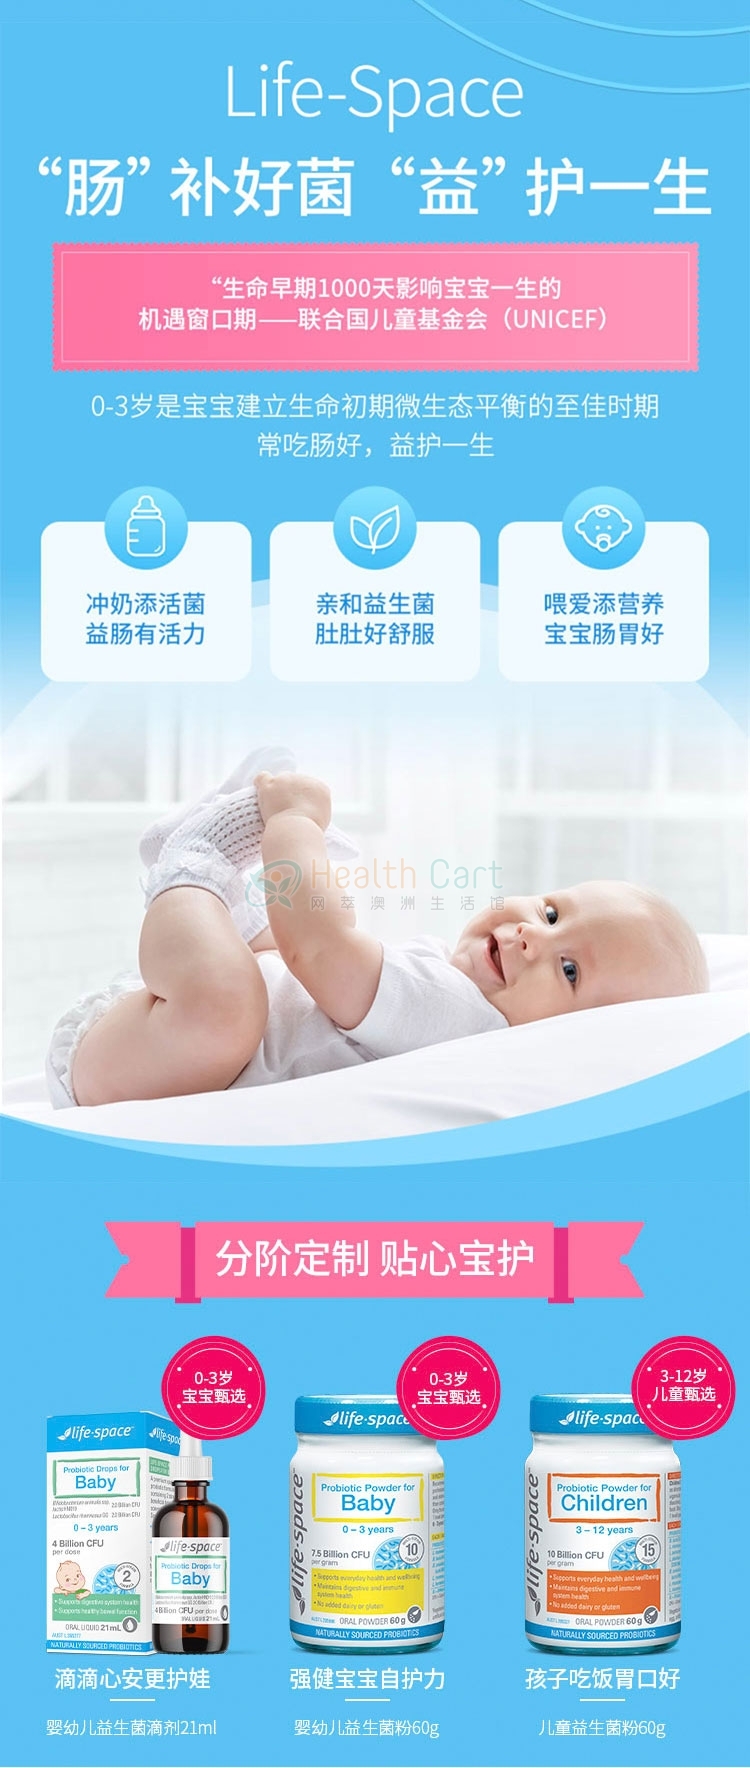 Life Space婴儿益生菌粉（0-3岁）60g - @life space probiotic powder for baby0 3years 60g - 9 - Healthcart 网萃澳洲生活馆